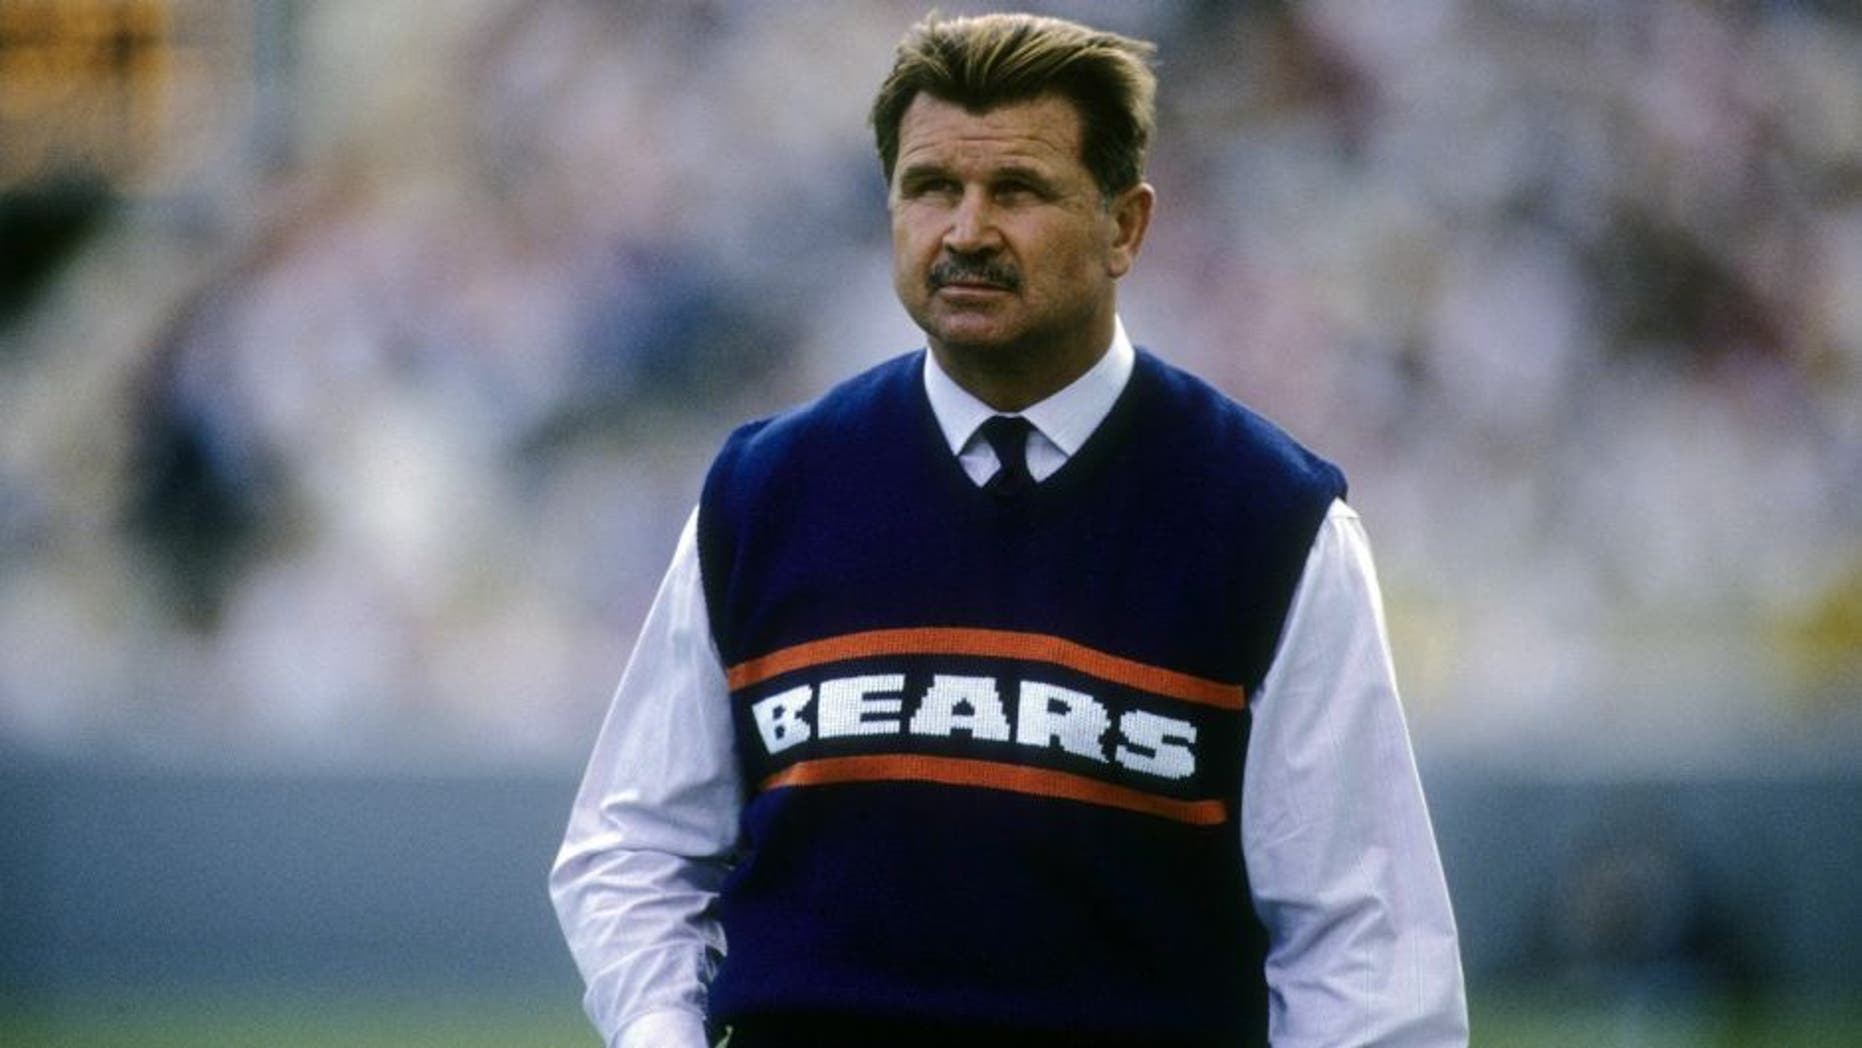 Mike Ditka is best known as a former NFL Chicago Bears coach, where he won the Super Bowl title in January 1986. (Getty Images)